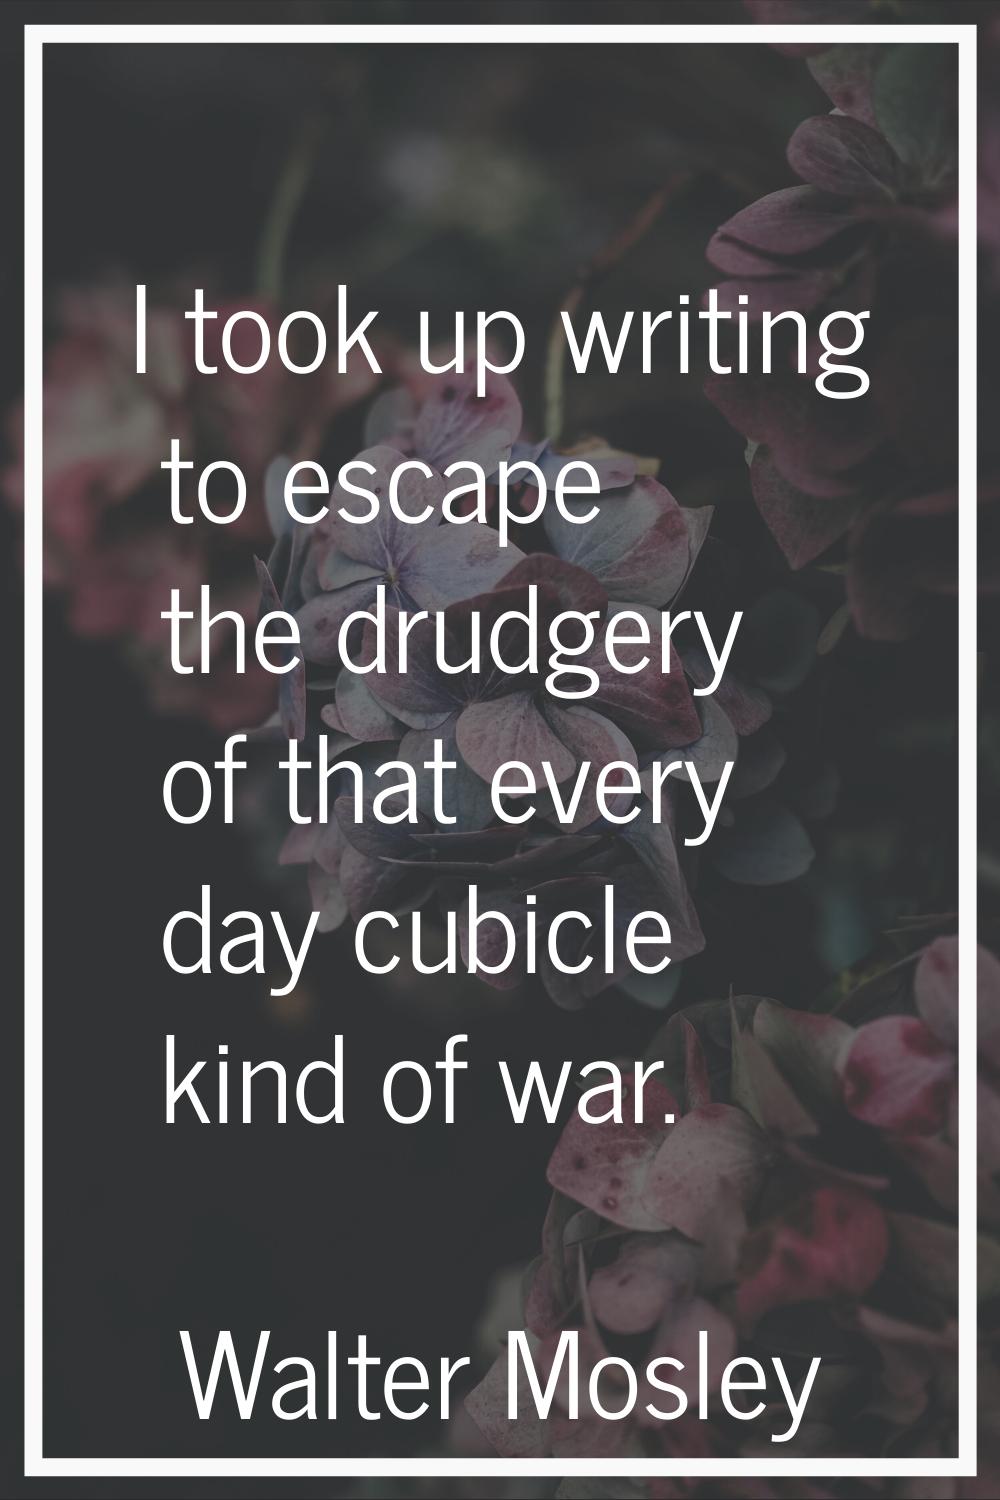 I took up writing to escape the drudgery of that every day cubicle kind of war.